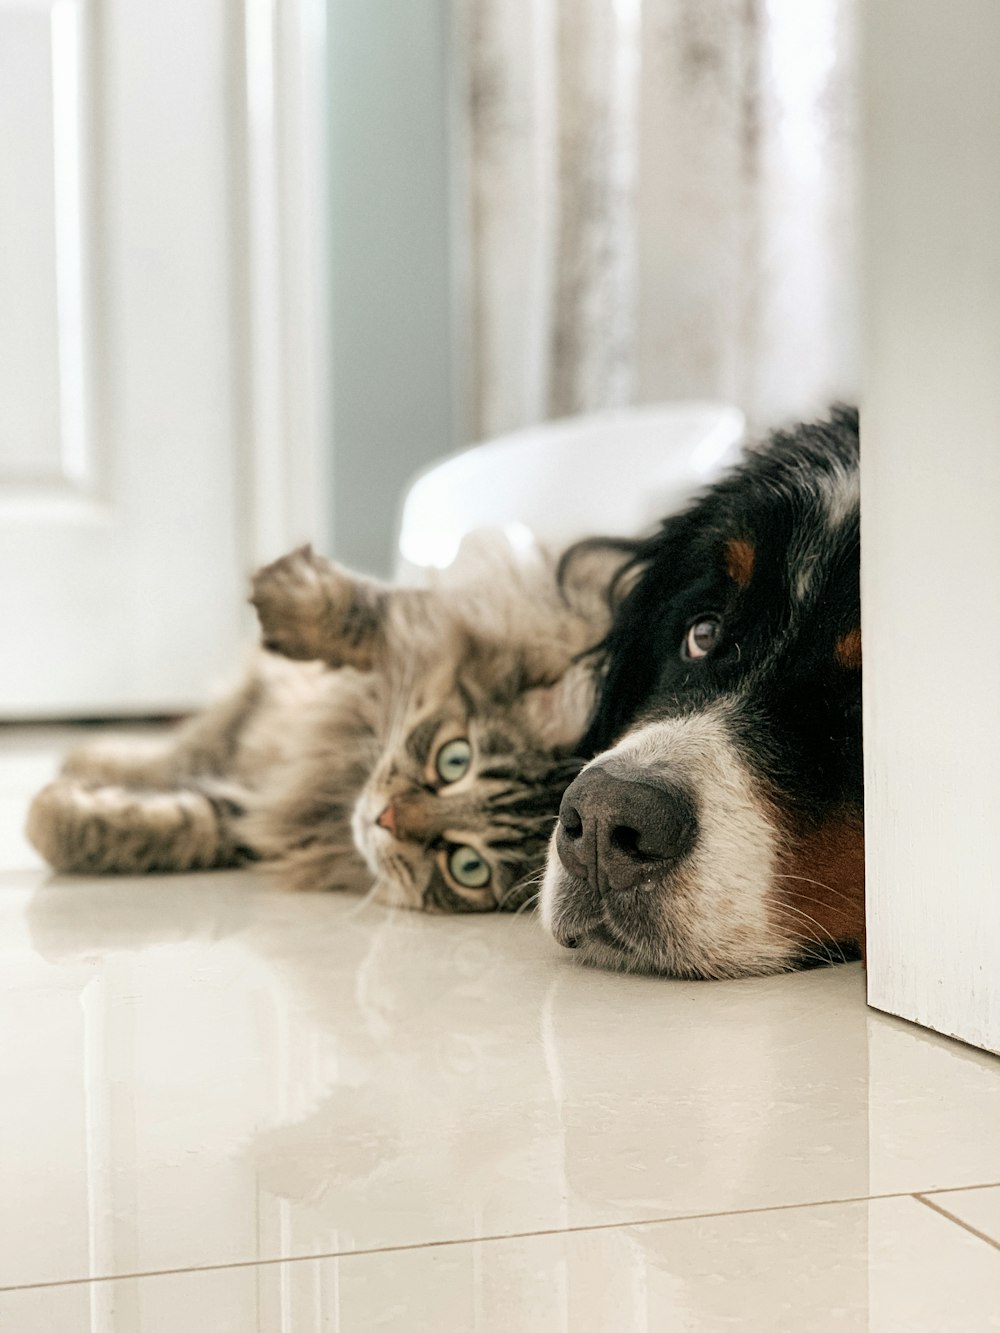 500+ [HQ] Cat And Dog Pictures | Download Free Images on Unsplash